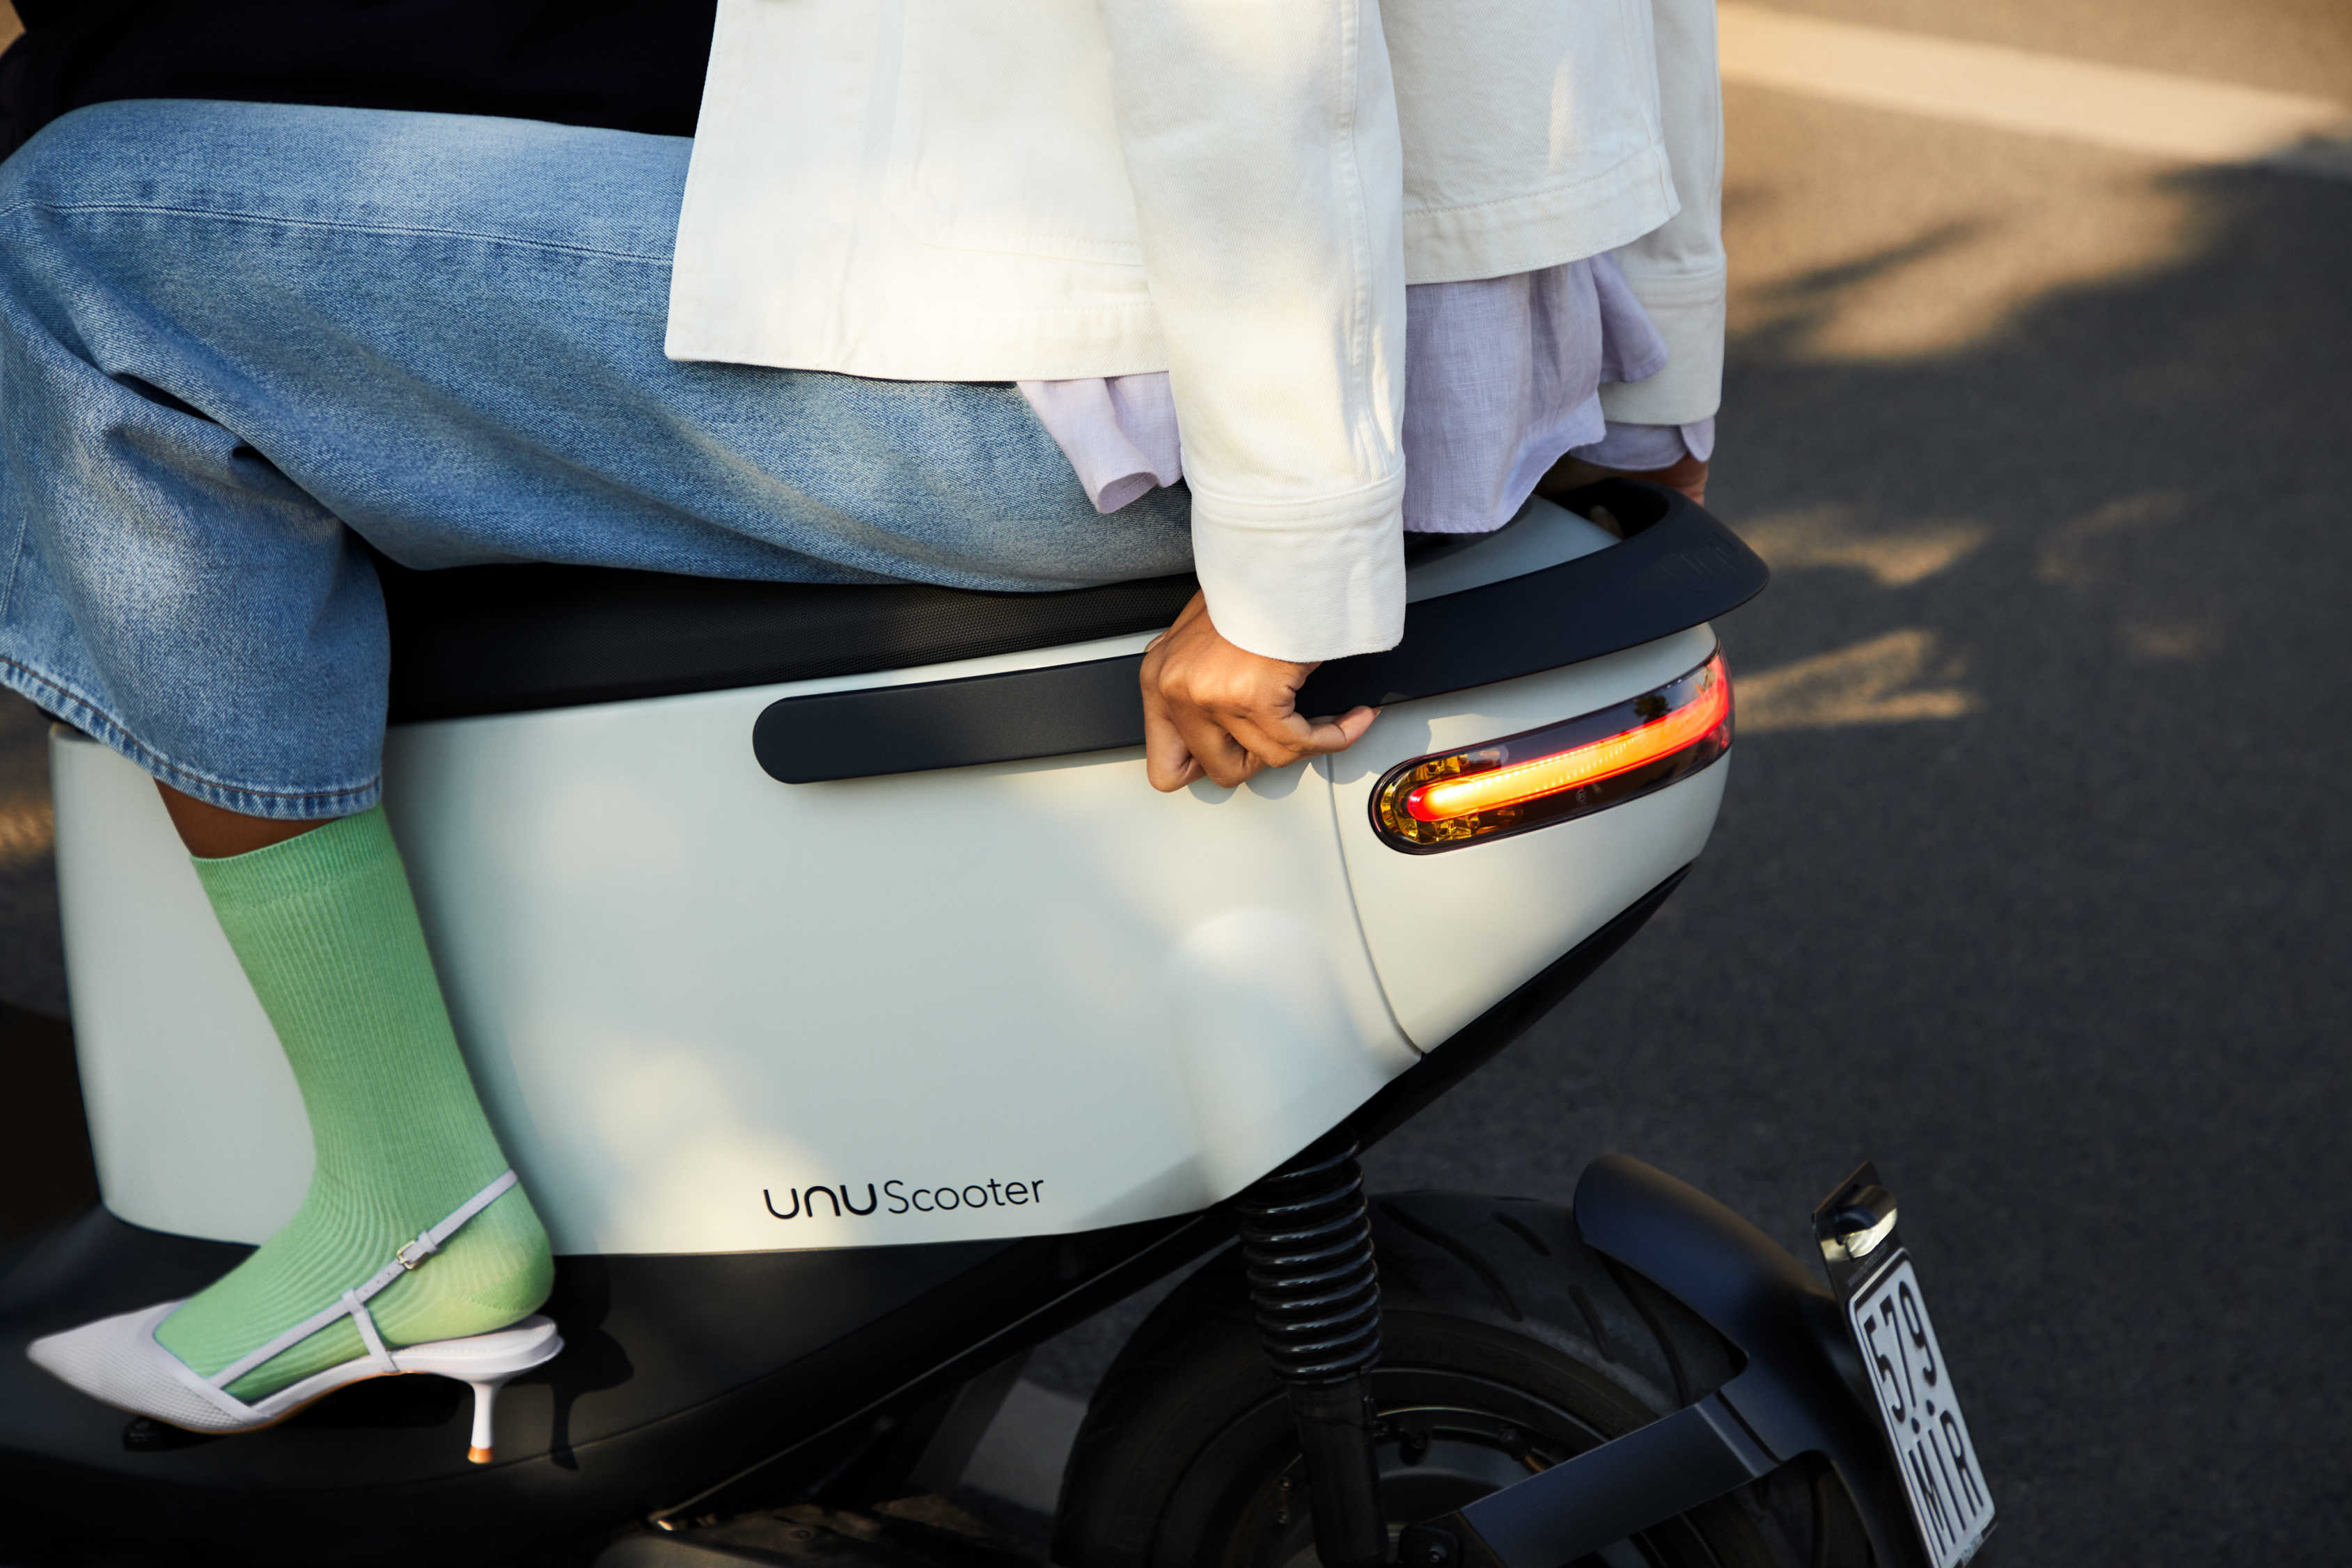 Unu is already well-known in many German cities, where numerous freedom-loving people are enjoying the perks of e-mobility and flexibility on their own unus. And the good news is true: Our powerful e-scooters are now also available in the Netherlands.